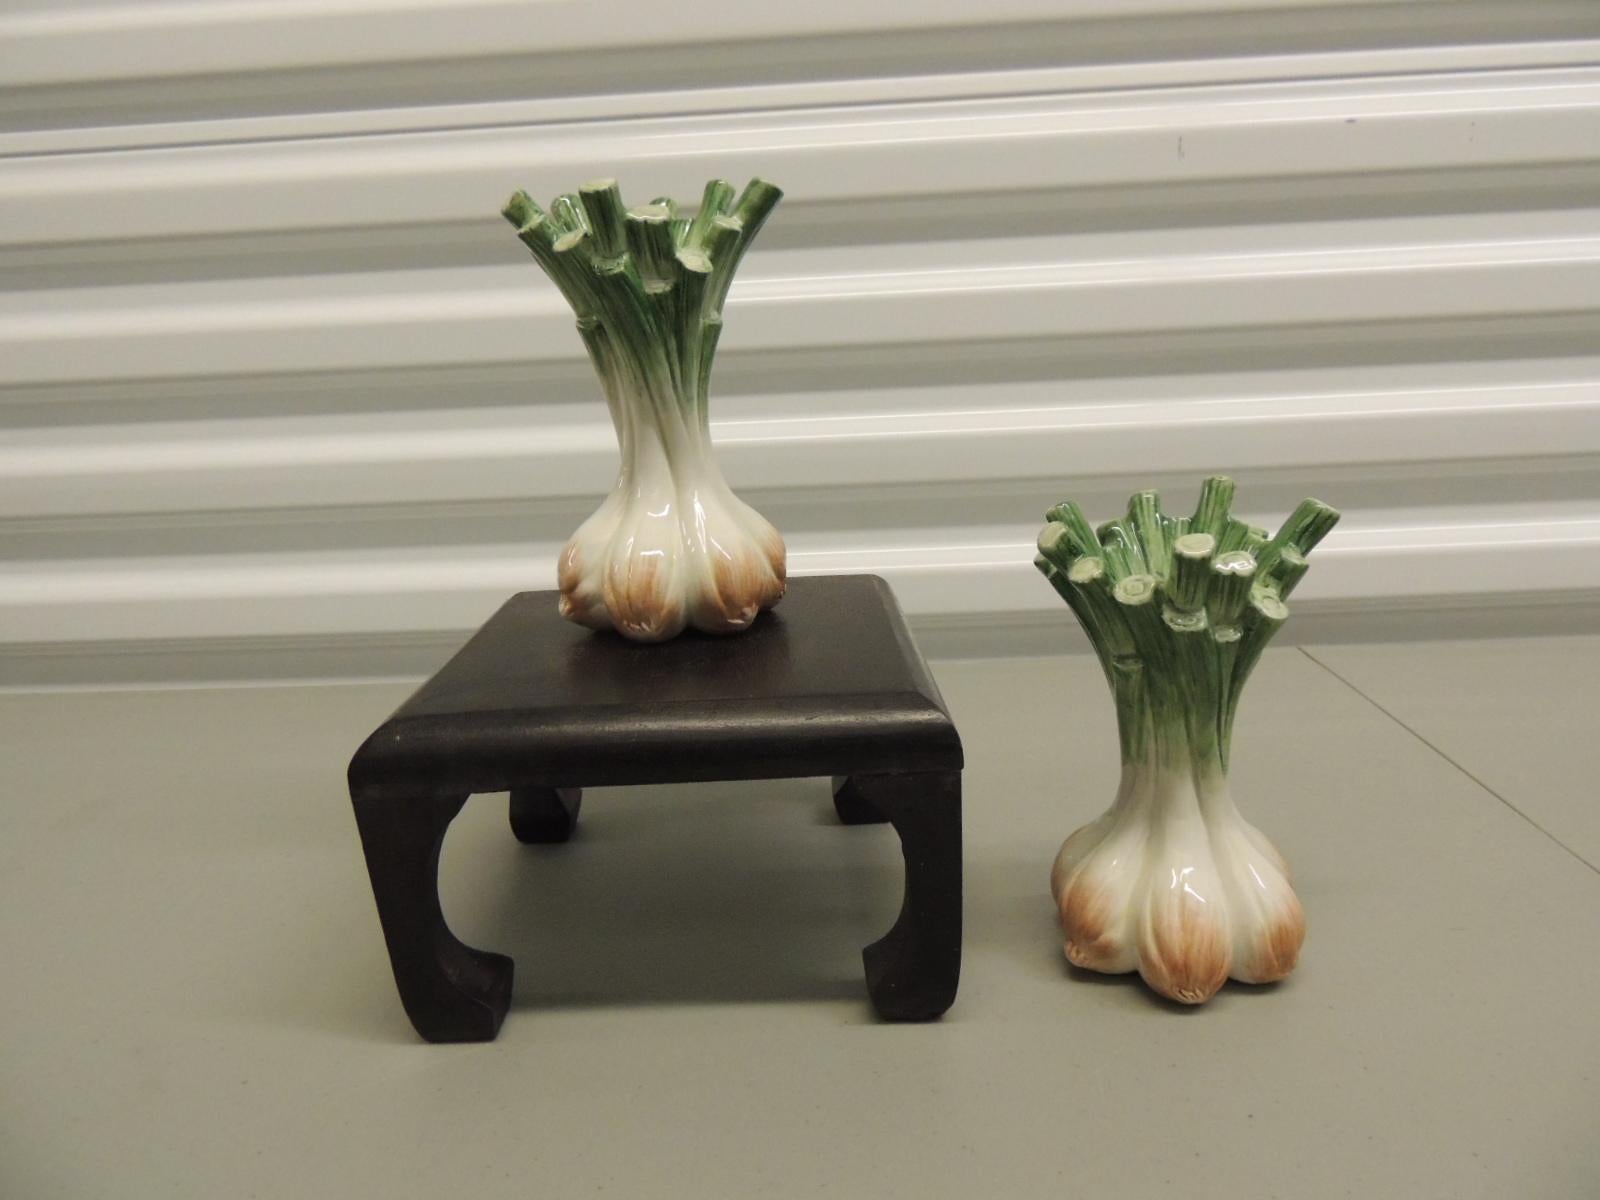 Bohemian Pair of Hand Painted Ceramic Onions Candlesticks